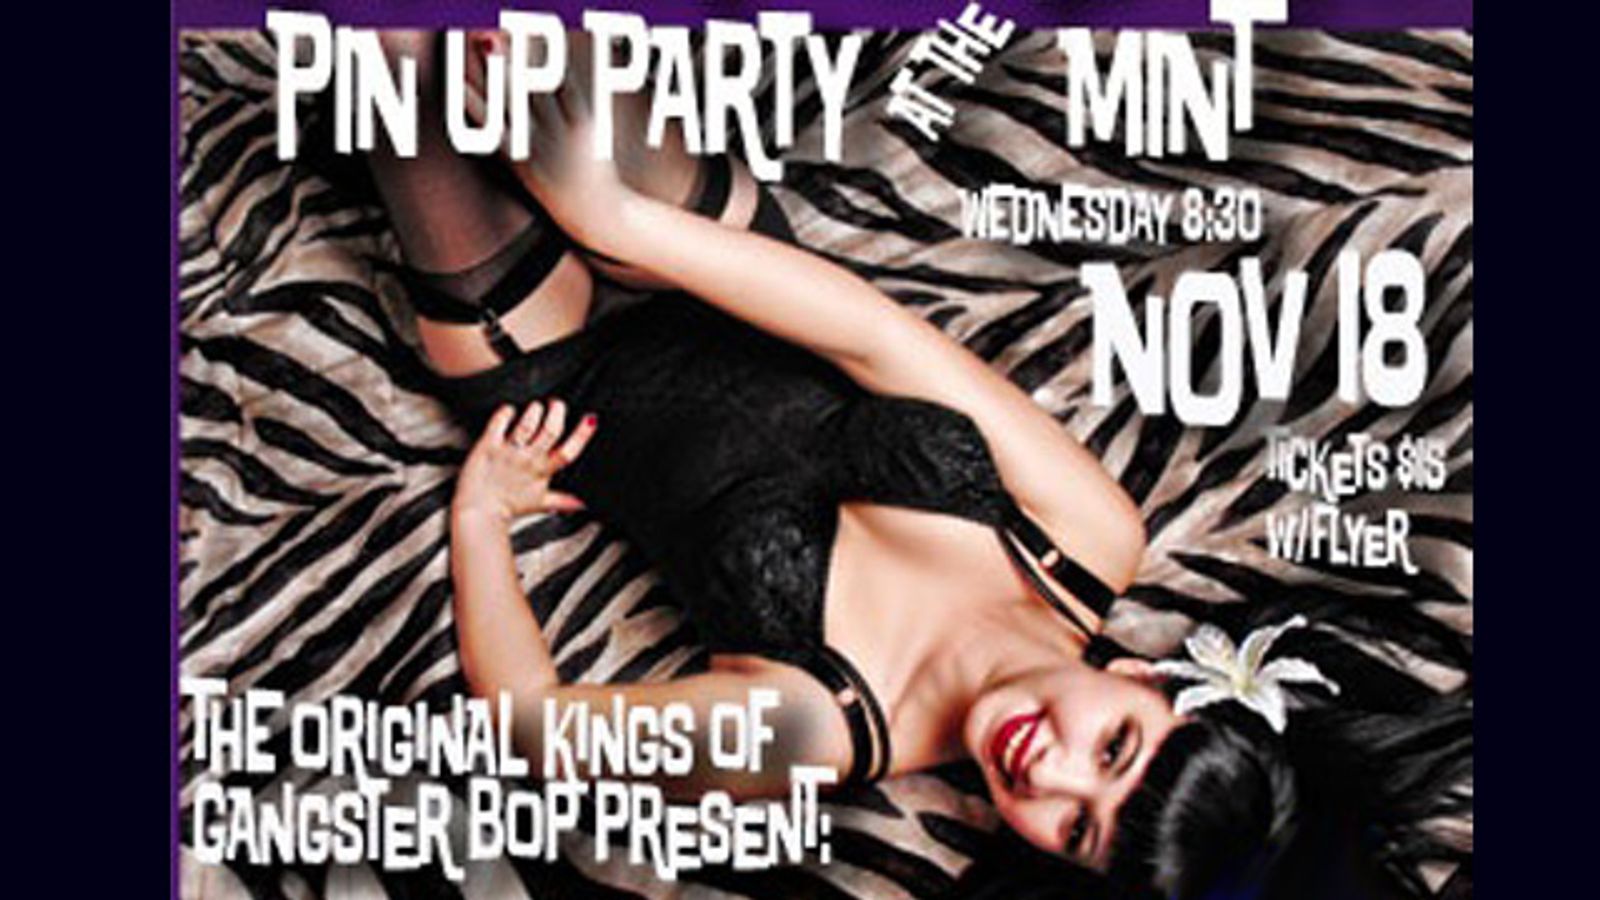 Evan Seinfeld to Host Pin-Up Party Wednesday